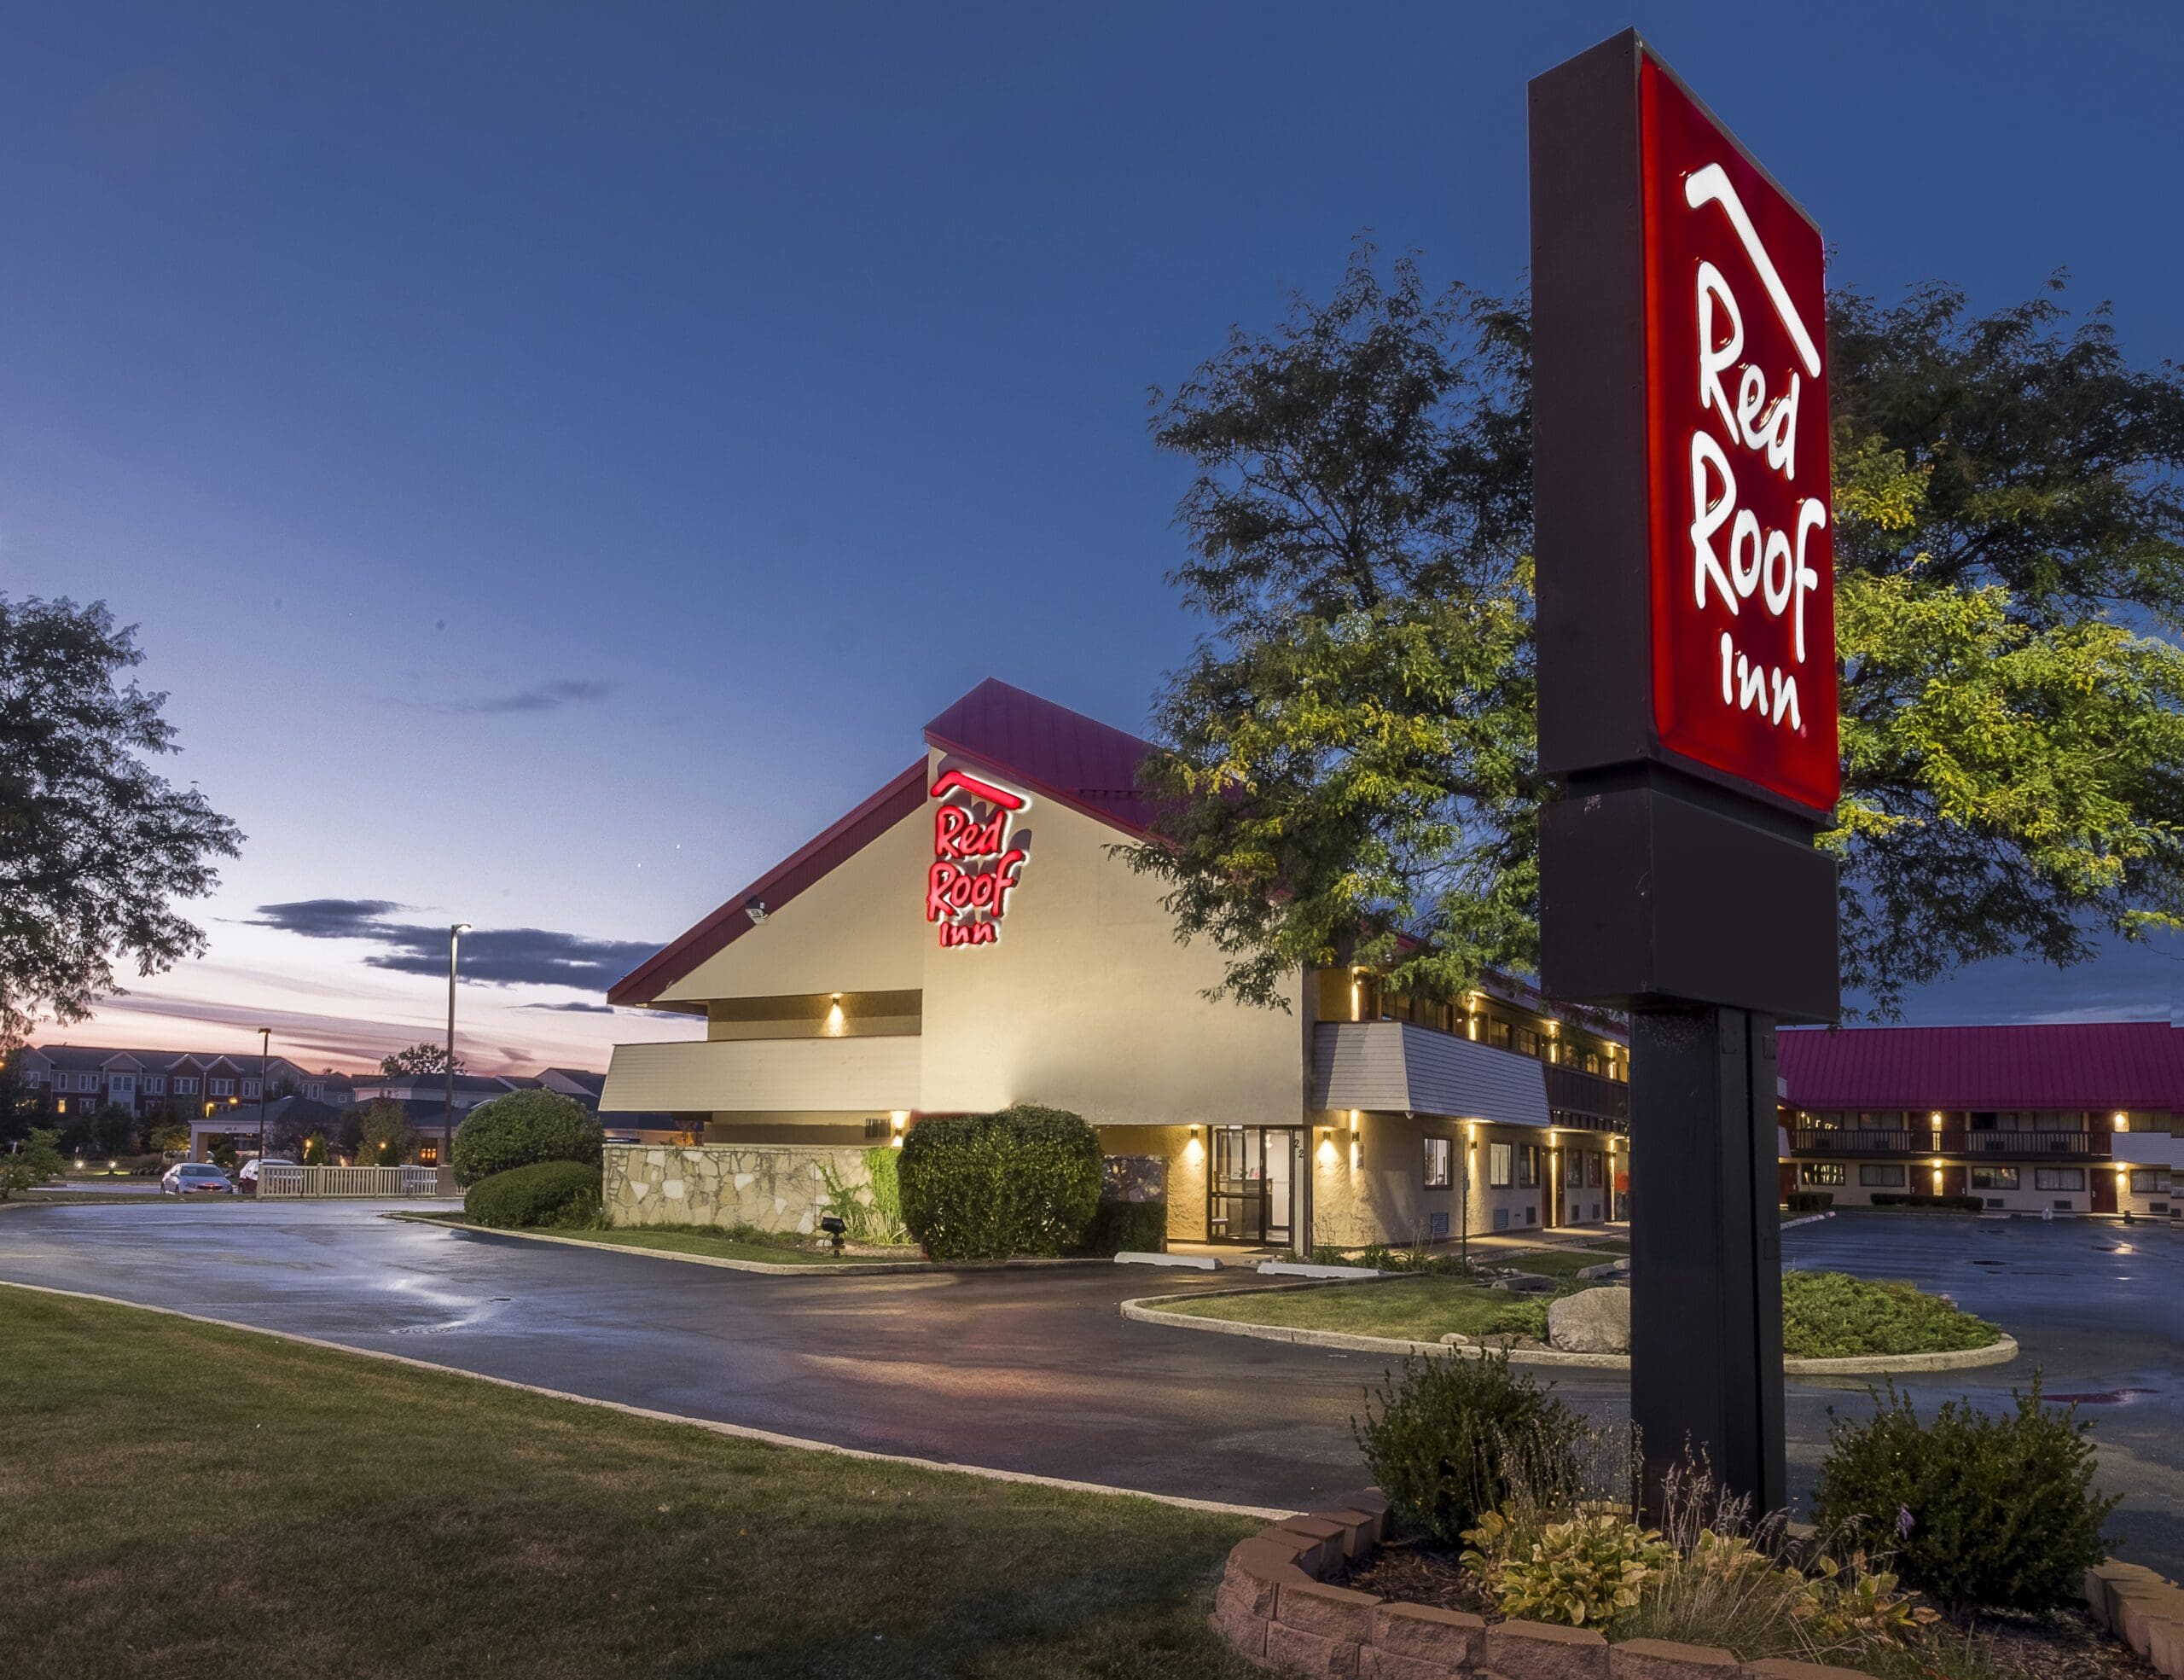 Red Roof Inn - Cheap Hotels in Chicago: Where to Stay for Less Than $100 a Night